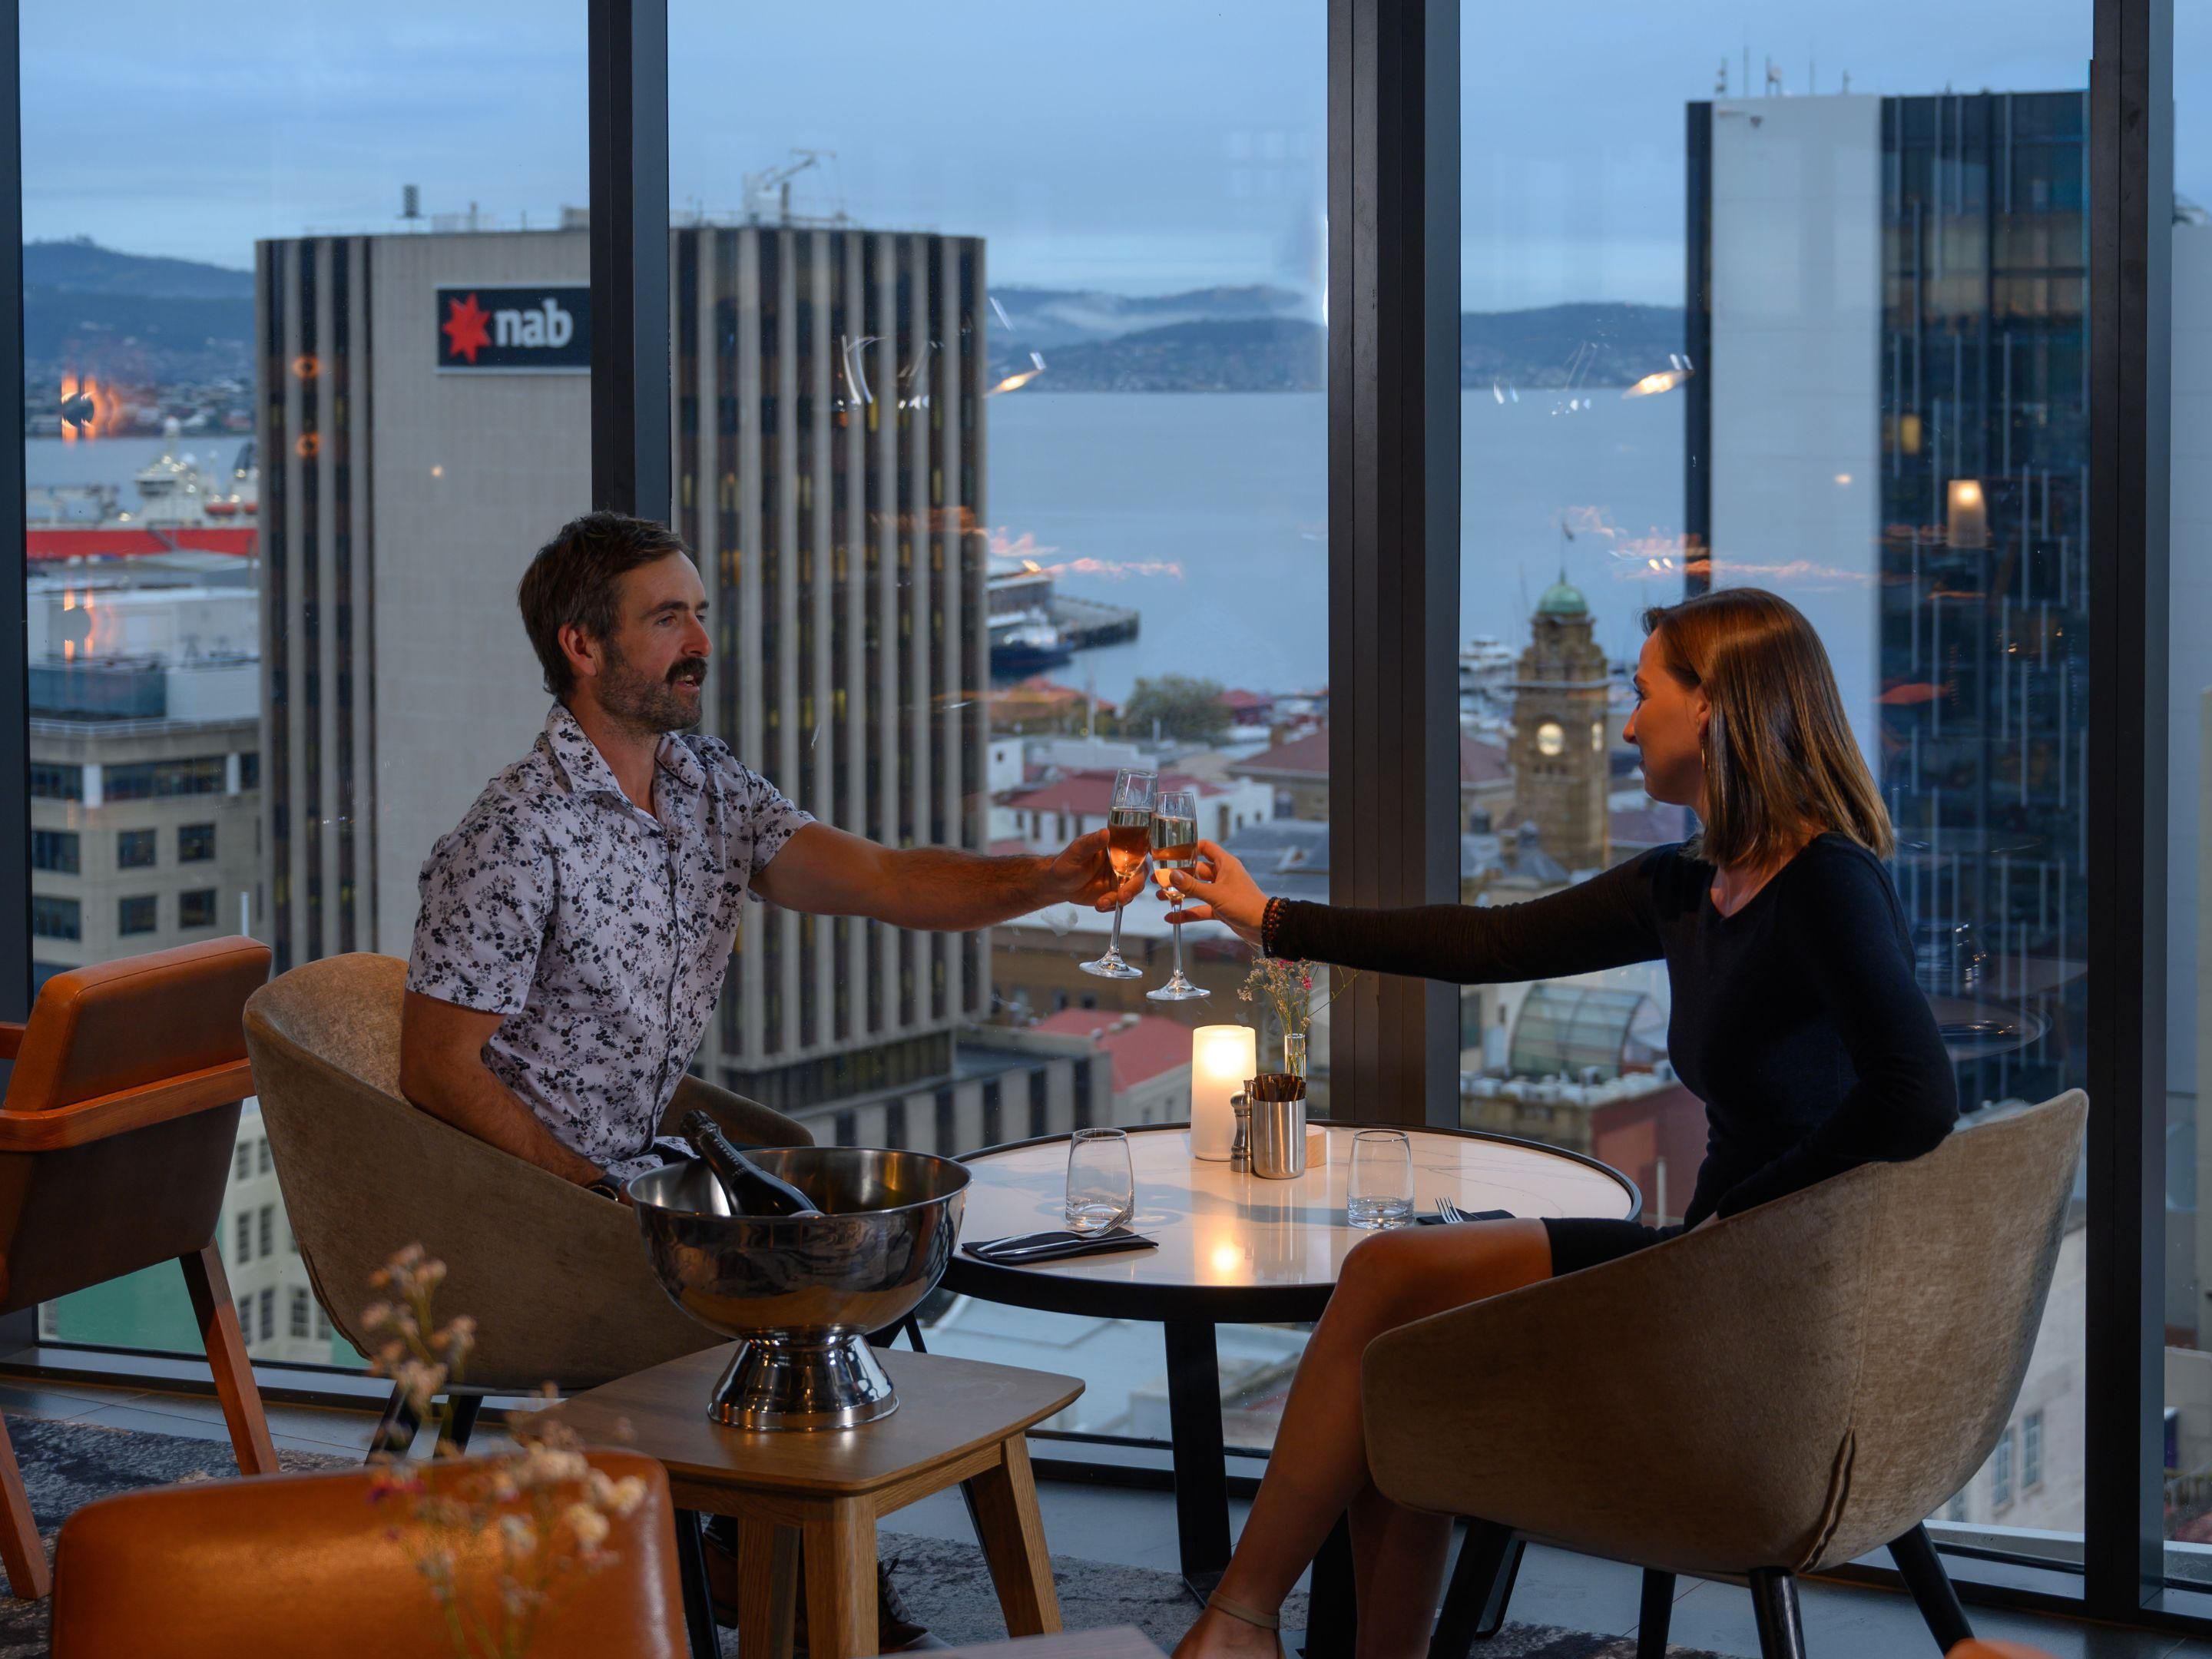 Elevate your stay to the next level at our Club Lounge on Level 12, featuring unparalleled views of Hobart. Enjoy exclusive benefits, including buffet breakfast, complimentary evening canapés and drinks from 5-7 pm, all-day tea and coffee, and 2-hour meeting room access. The perfect setting to either work or unwind.